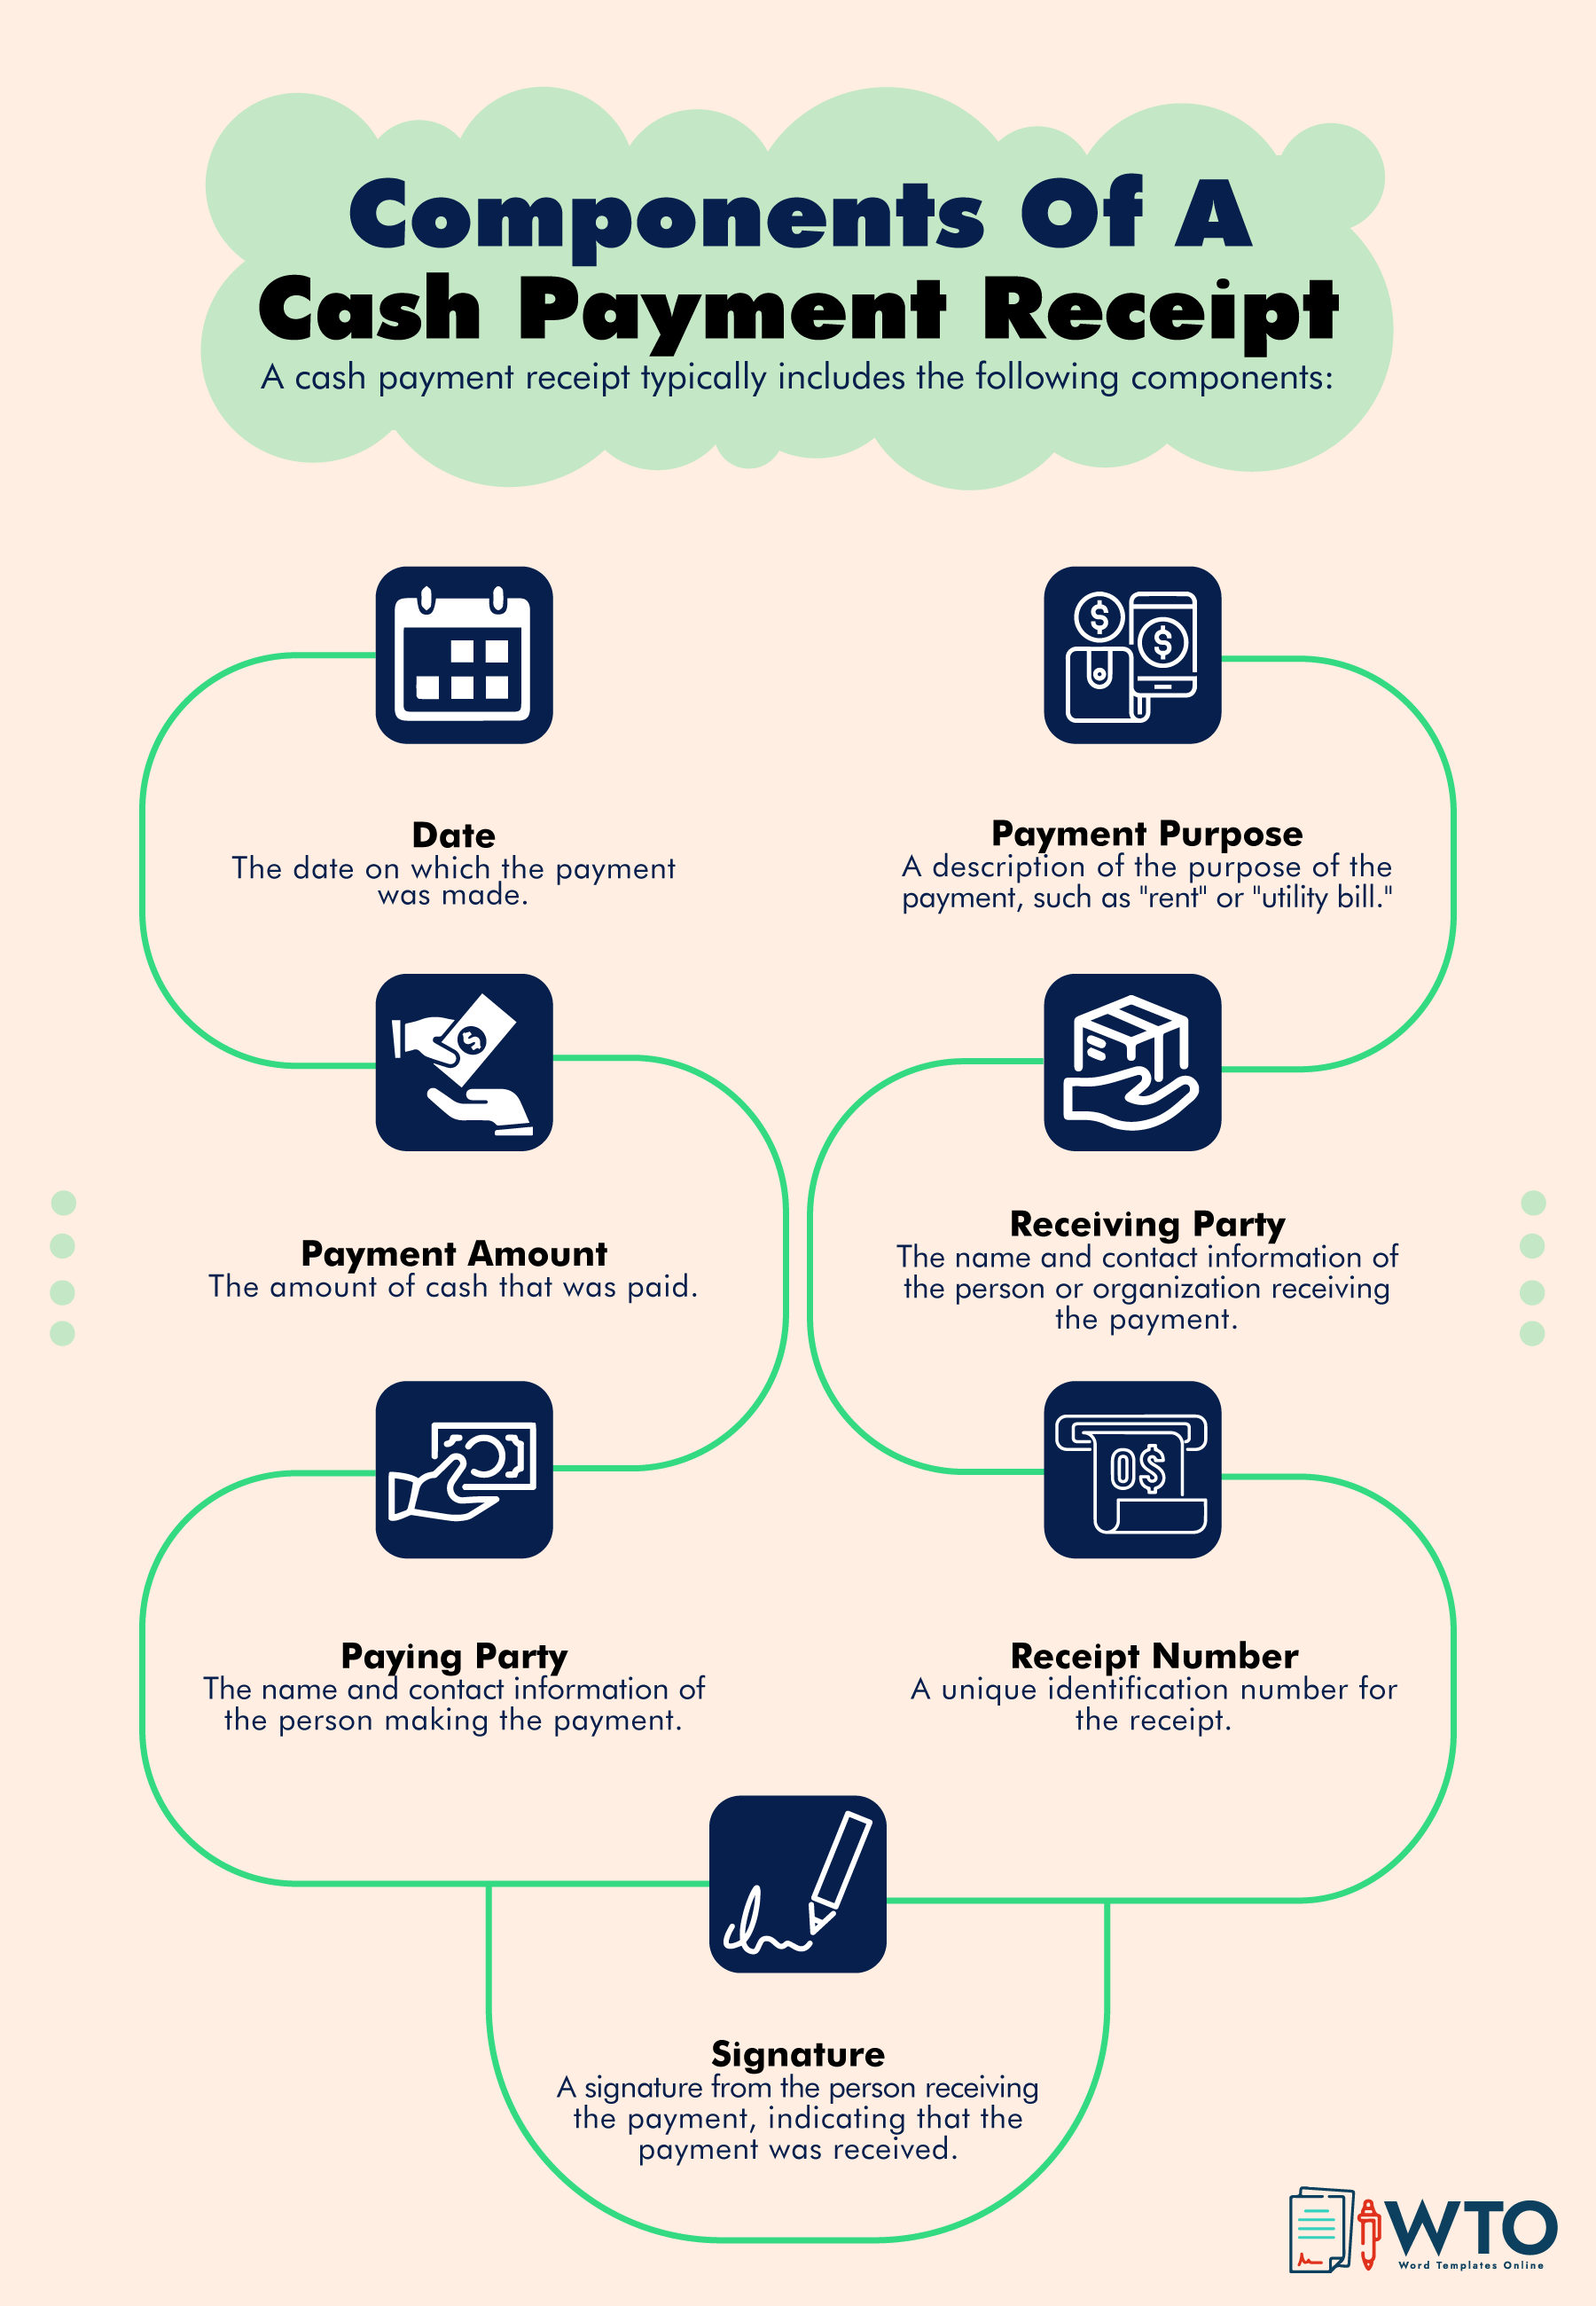 This infographic includes the components of a cash payment receipt.